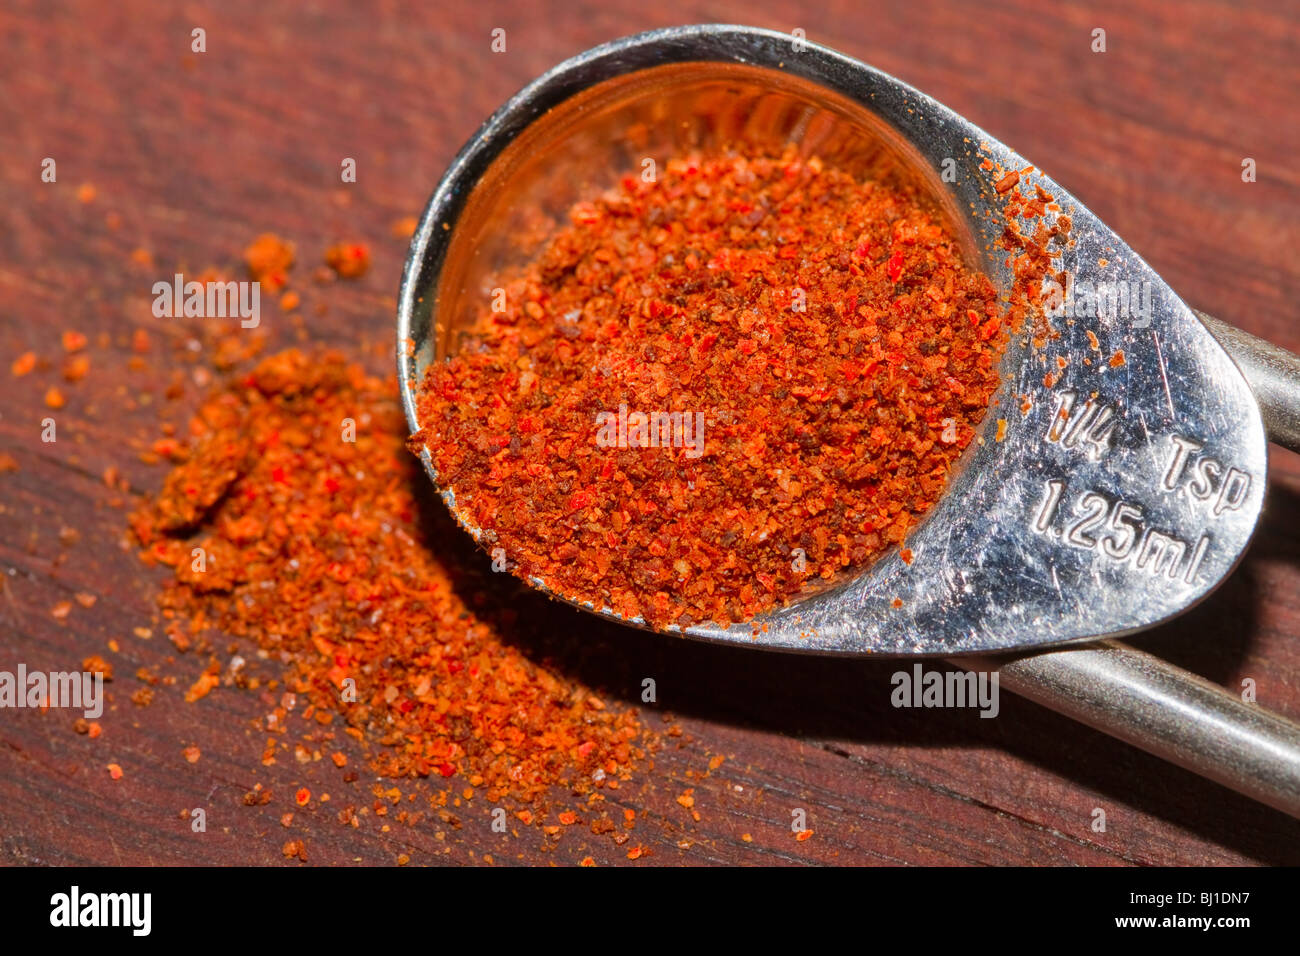 Cayenne pepper in a measuring spoon Stock Photo